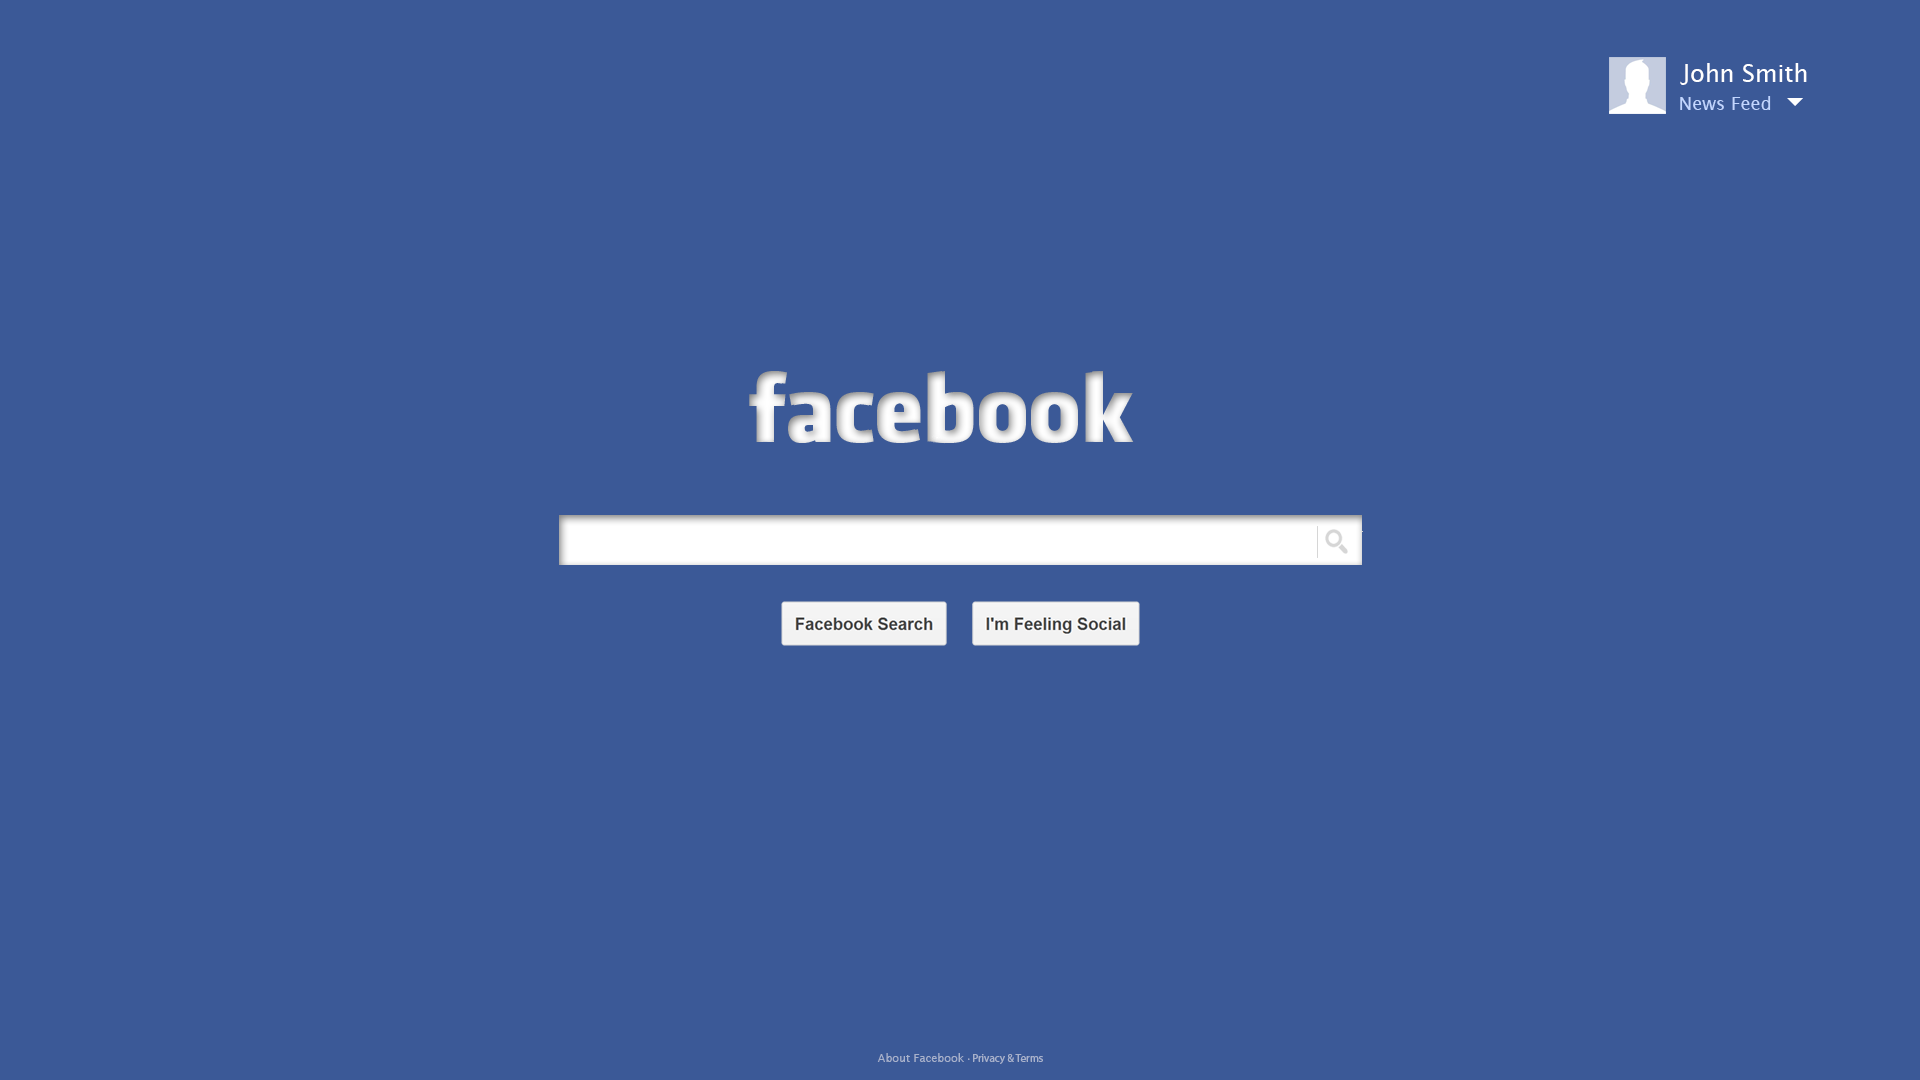 Facebook as a search engine